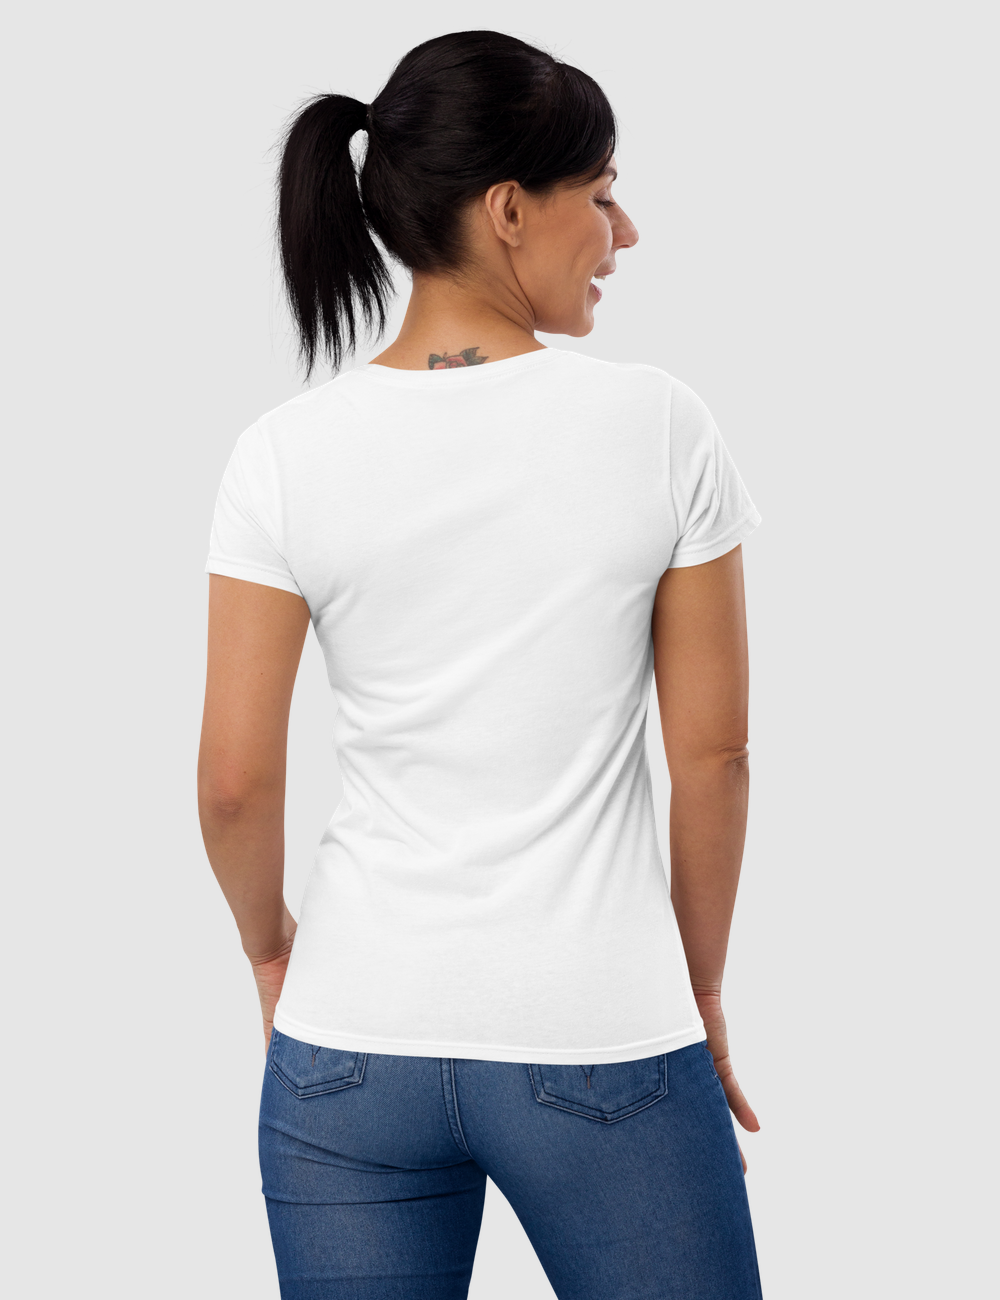 See You On The Other Side Women's Classic T-Shirt OniTakai